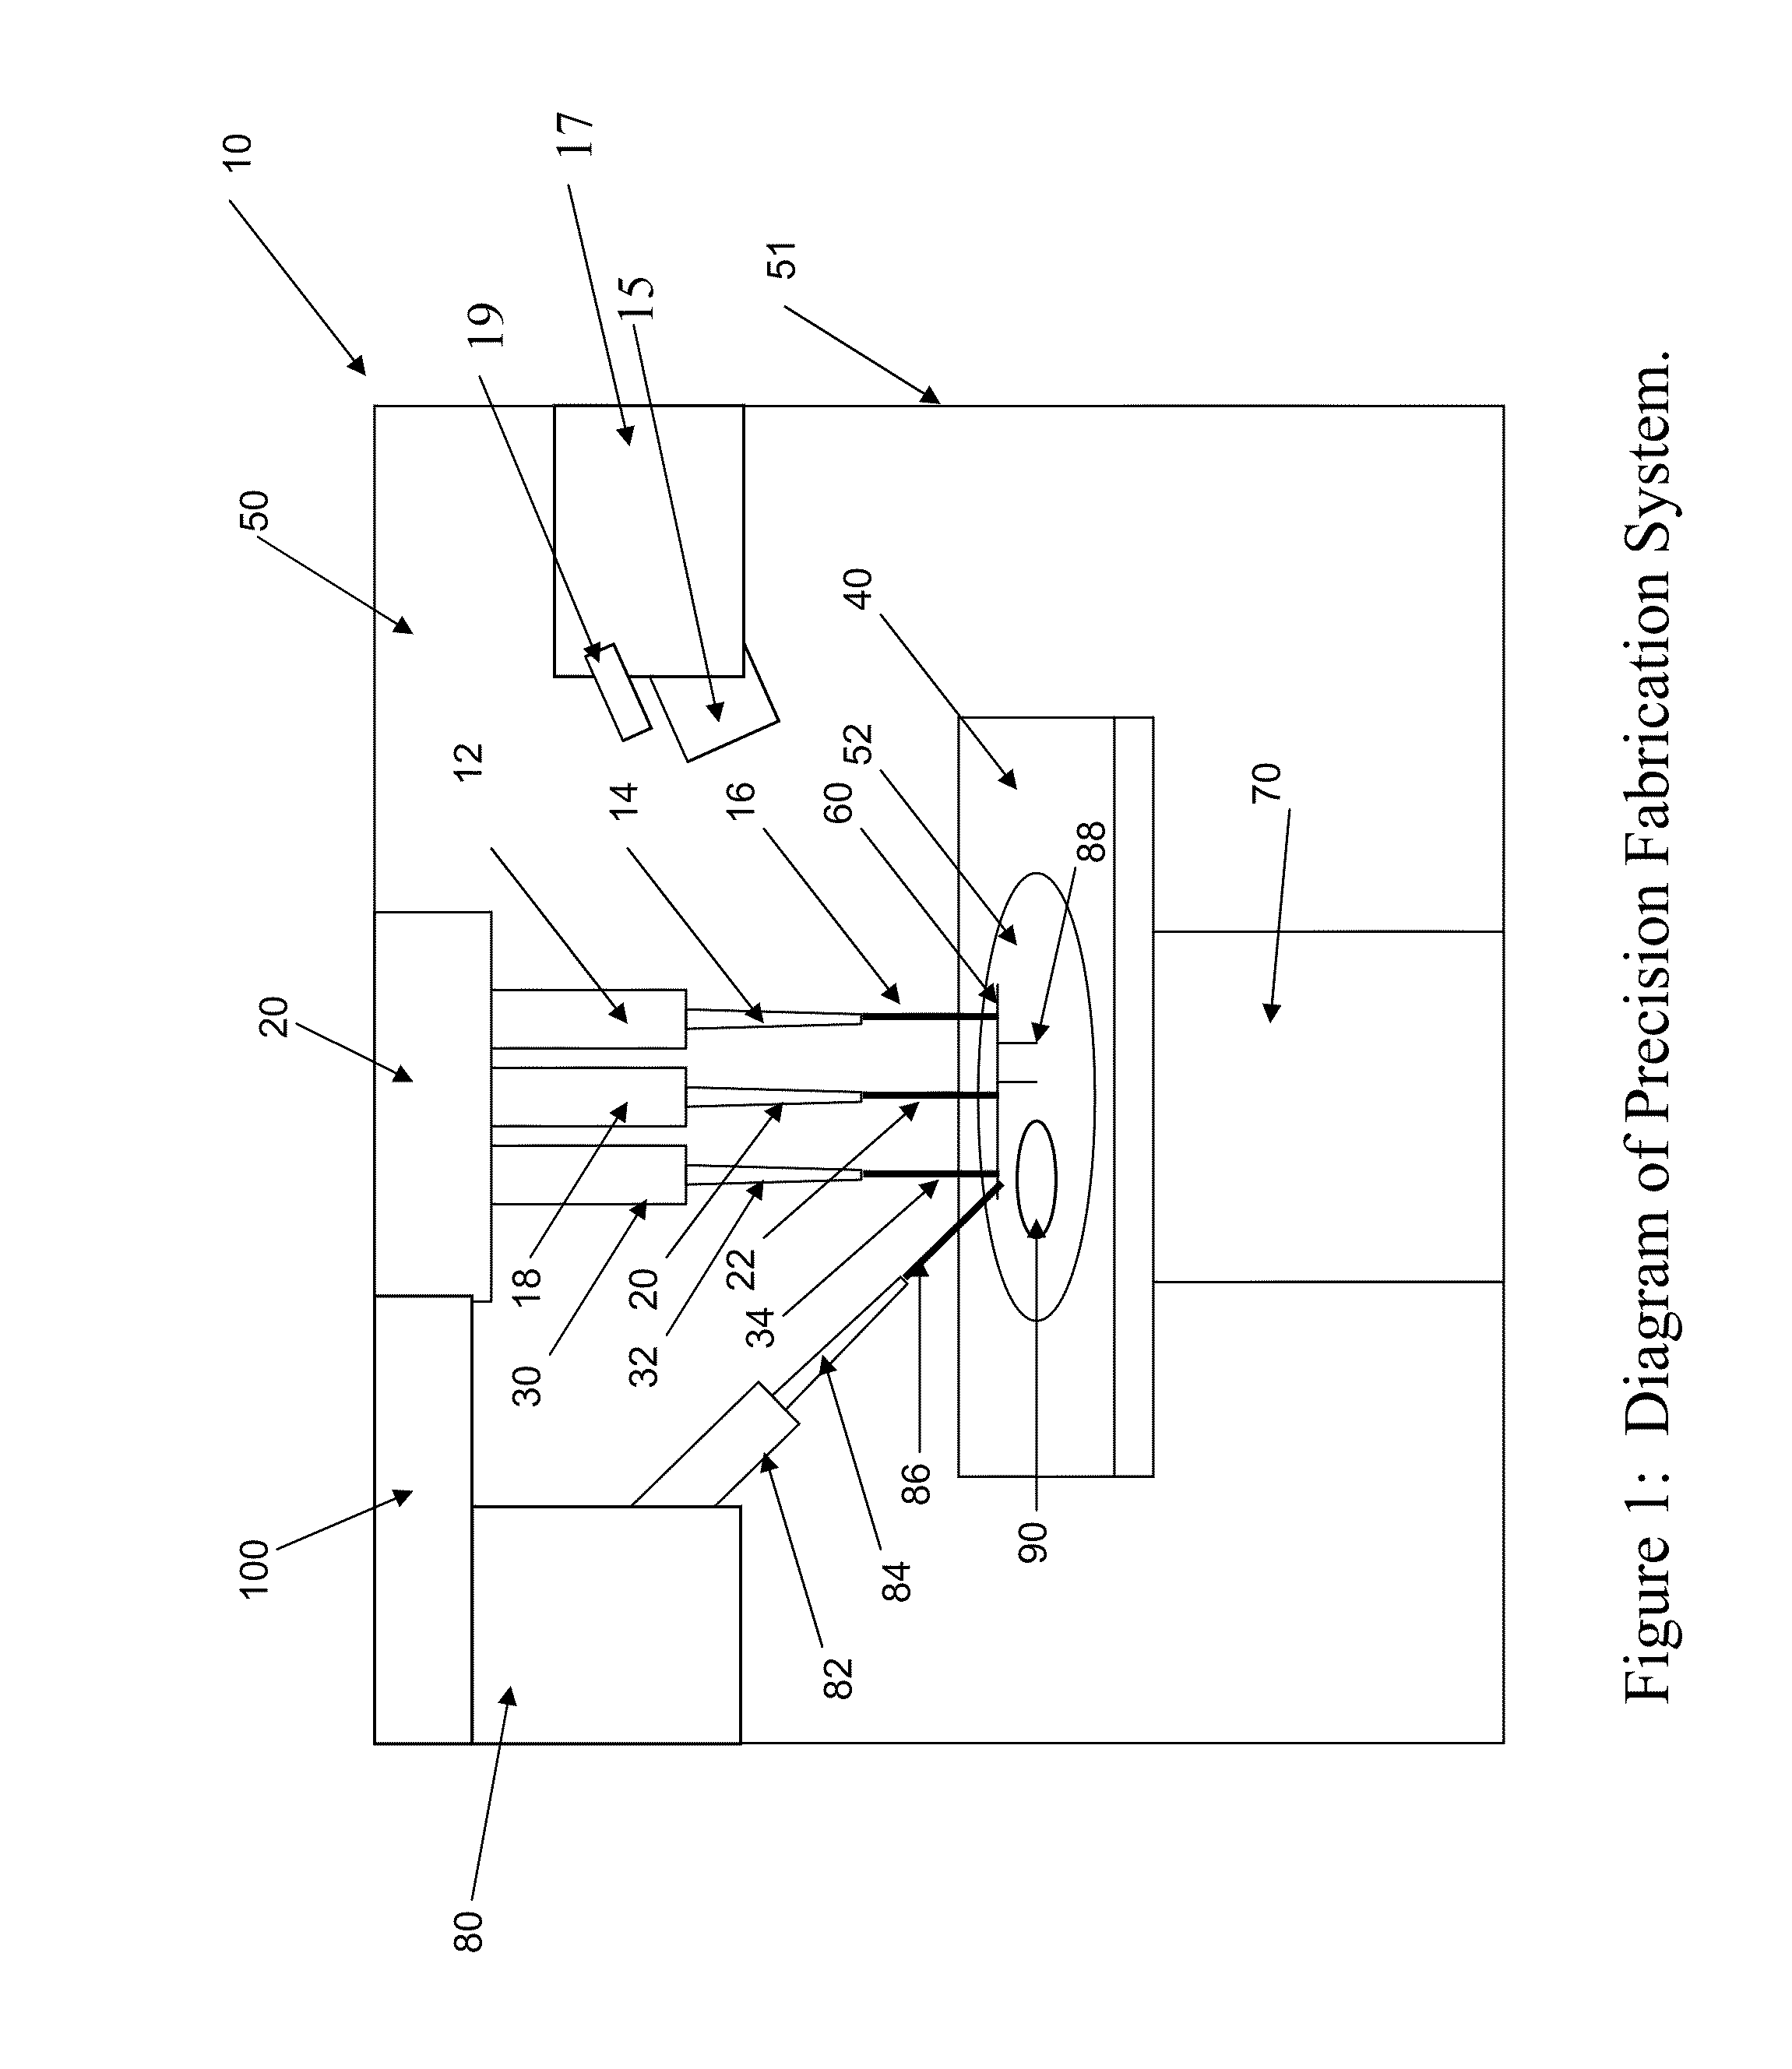 System and method for precision fabrication of micro- and nano-devices and structures